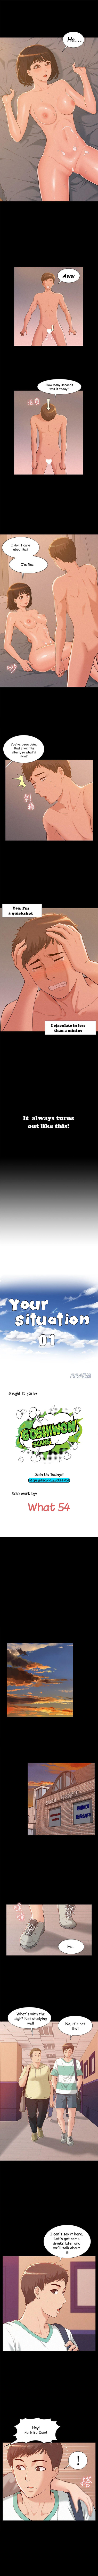 Your Situation image